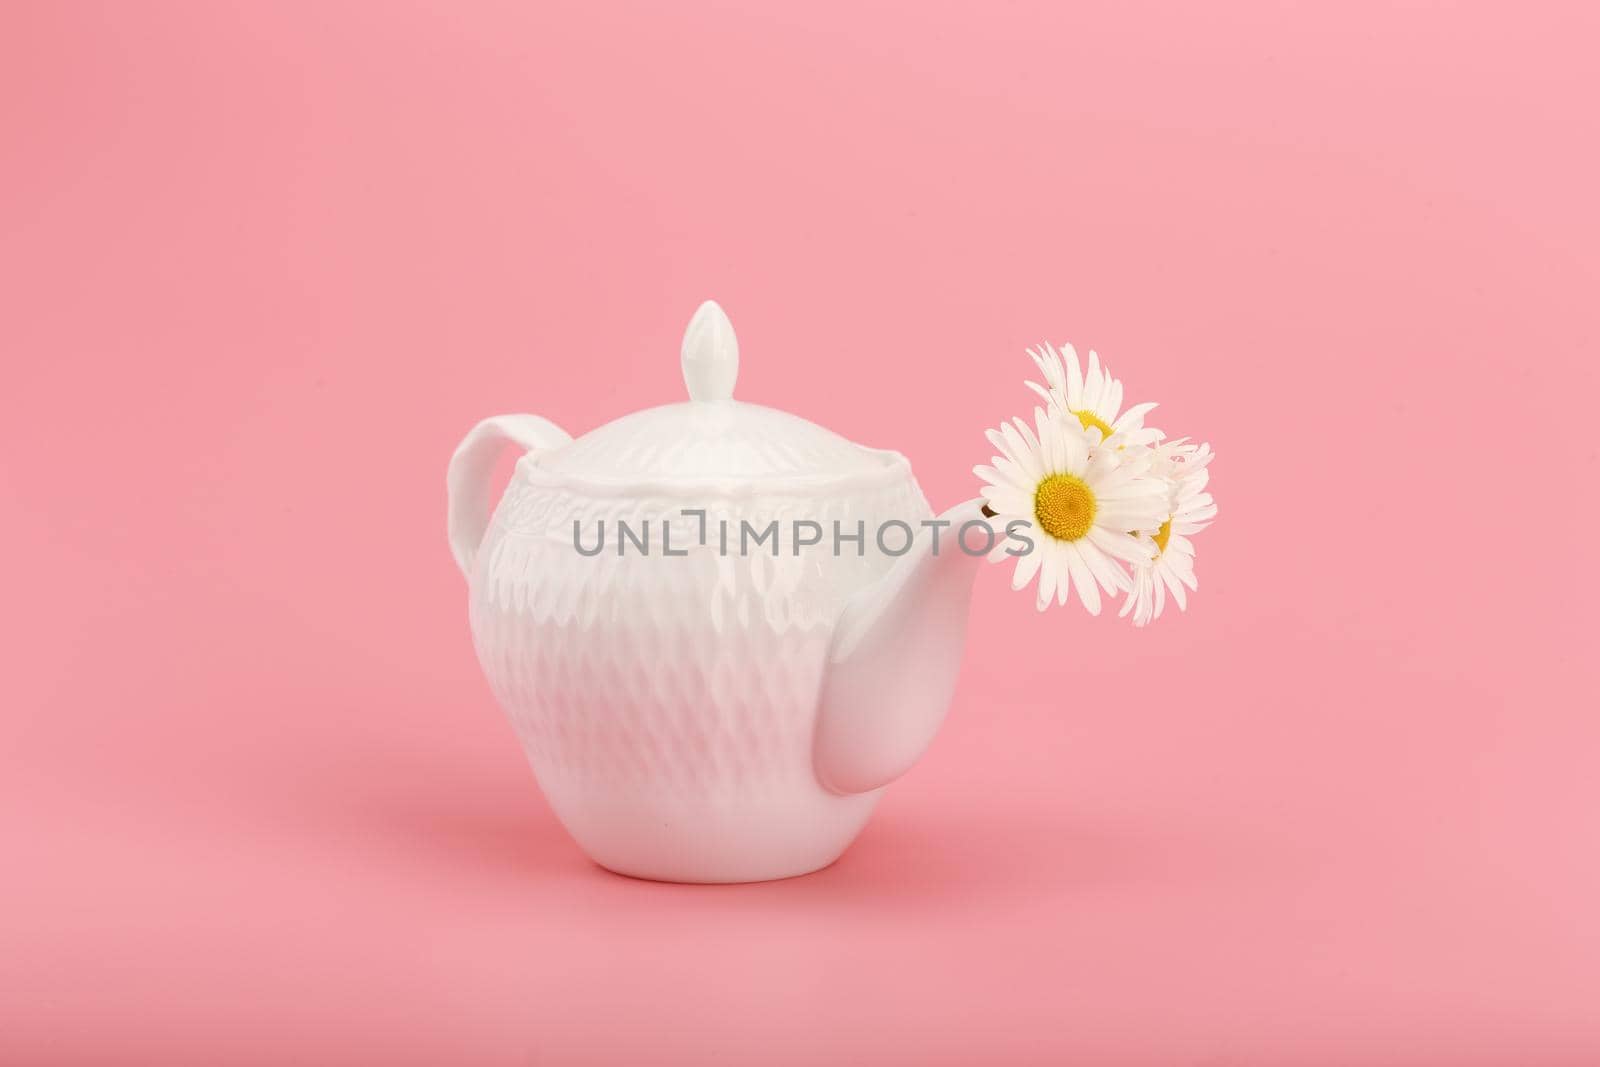 White porcelain tea pot with camomile flowers against pink background. Concept of herbal tea and wellness by Senorina_Irina